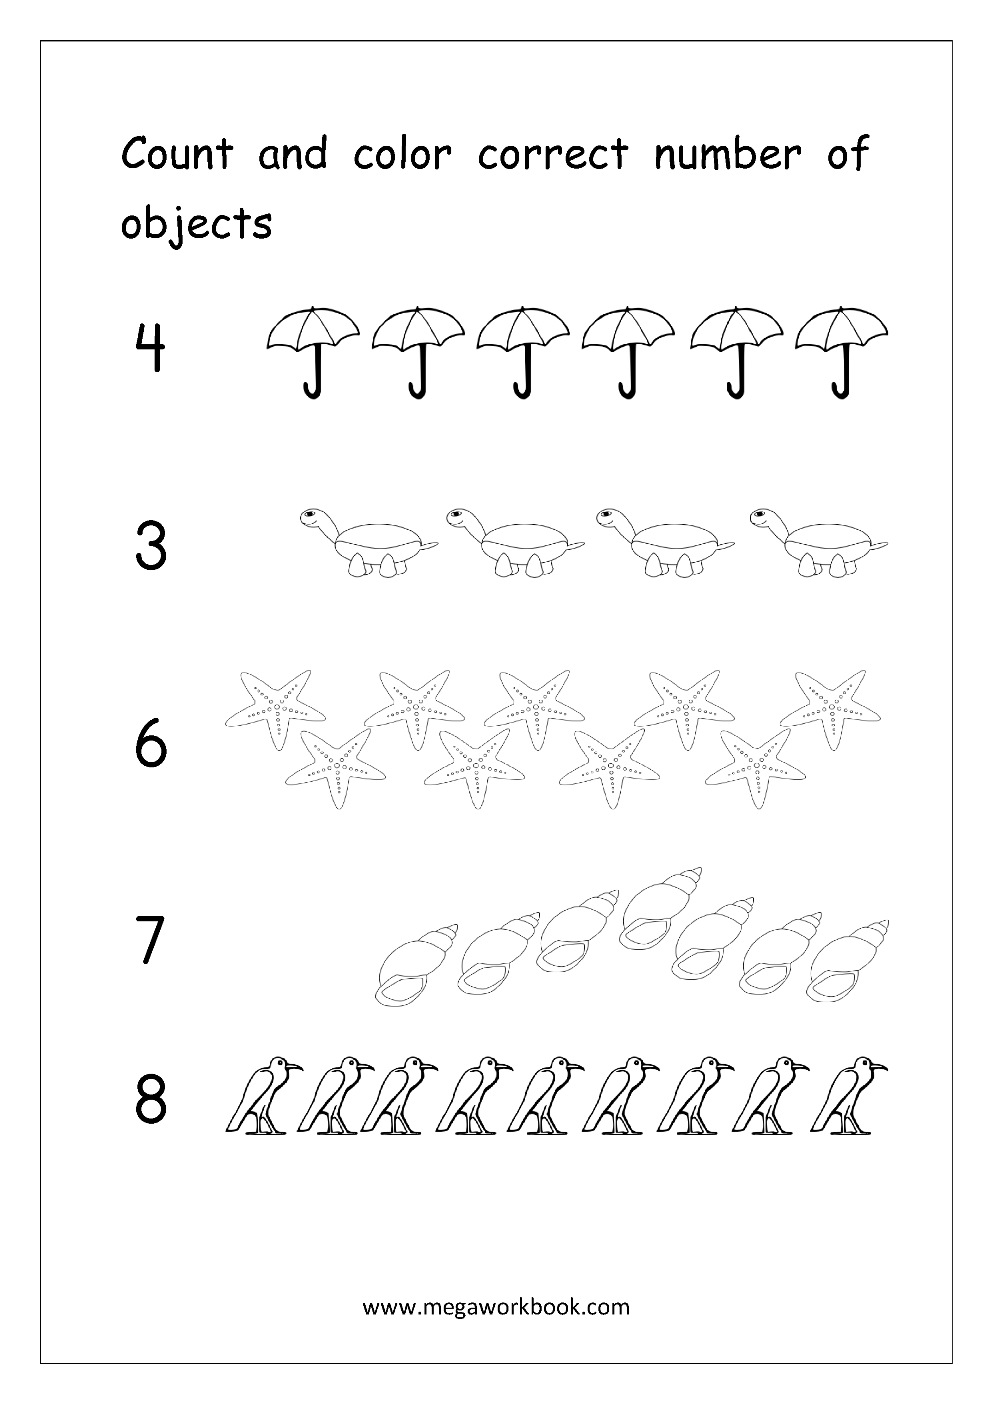 Number Counting Worksheets Math Counting Worksheets Free Counting Worksheets For Kindergarten And Preschool MegaWorkbook